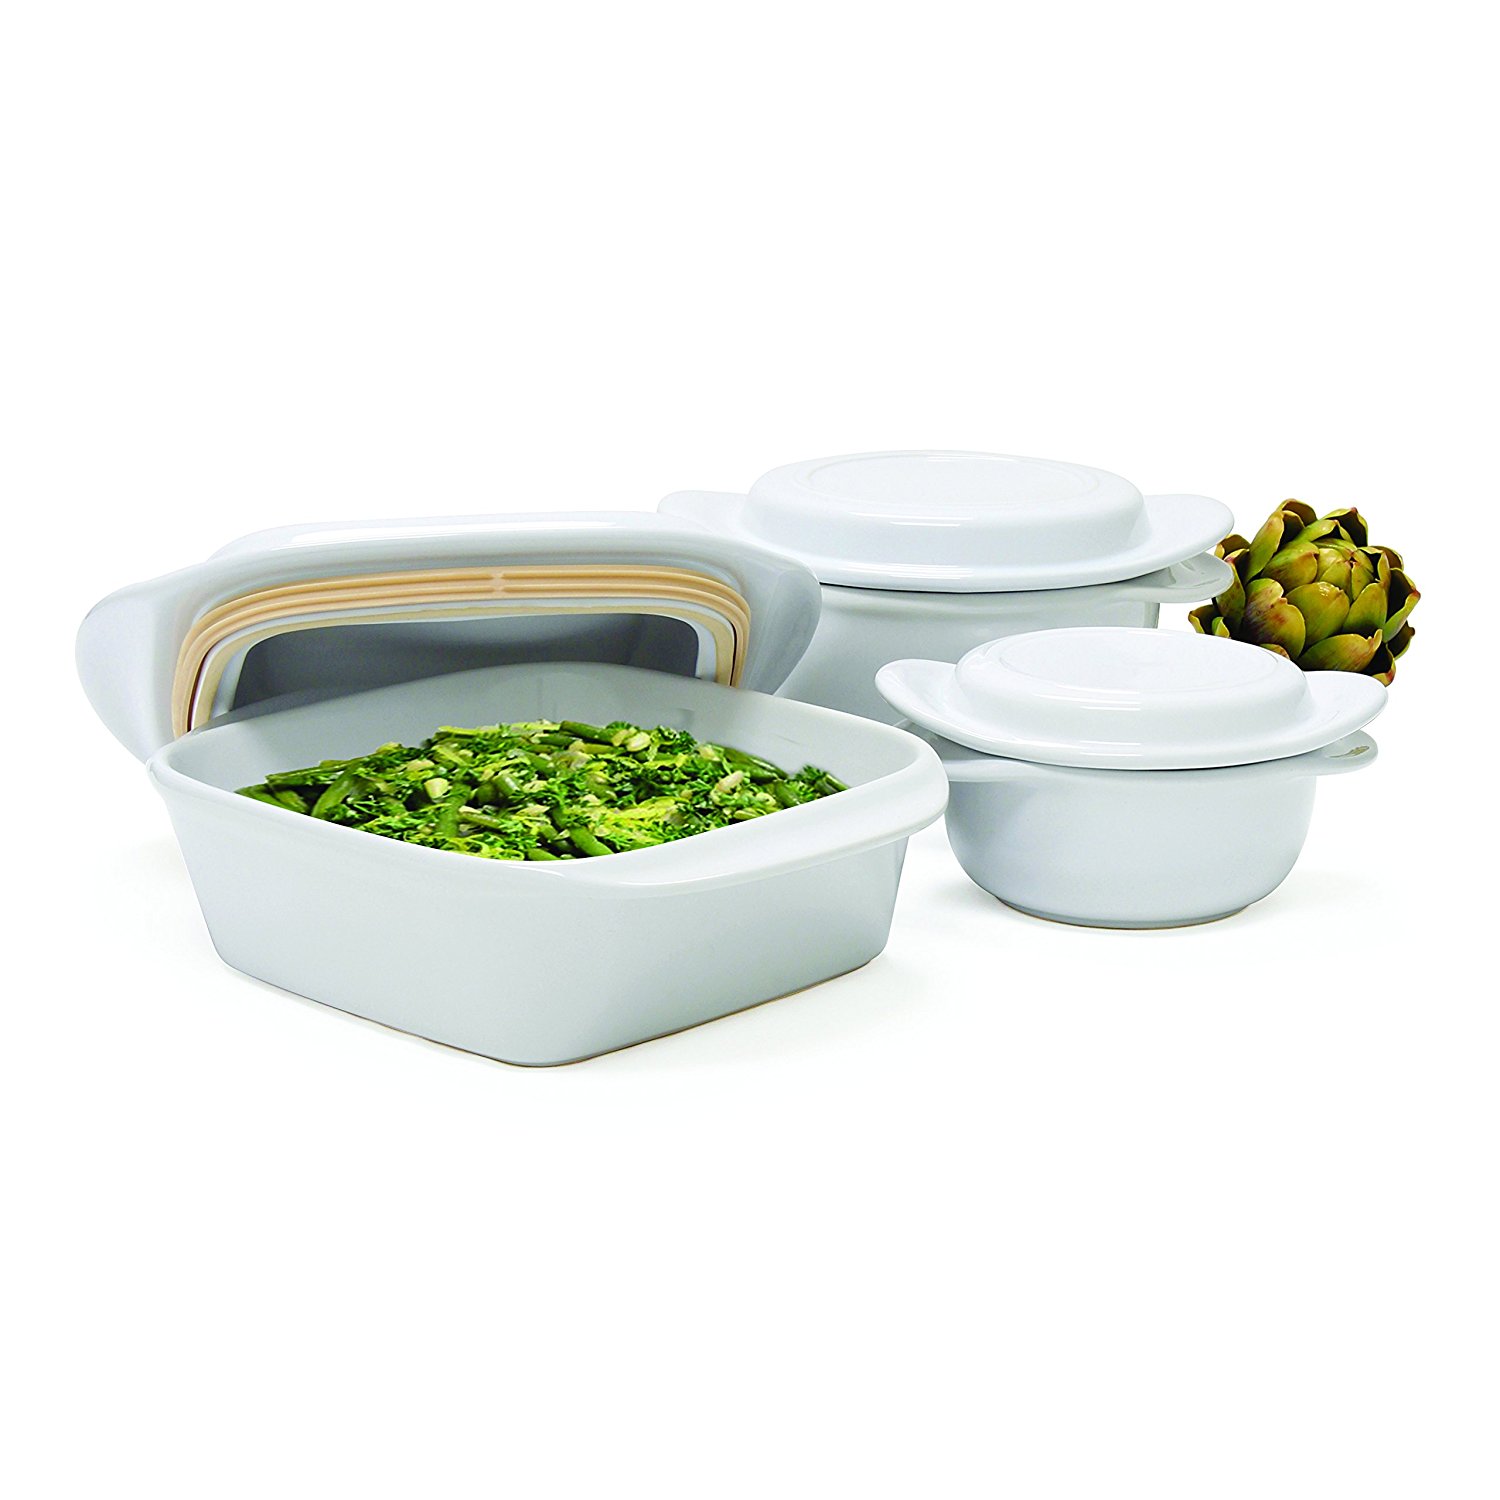 Chantal 93-MT17 WT Make and Take Round 1 ¾-Quart Casserole with Lid ...